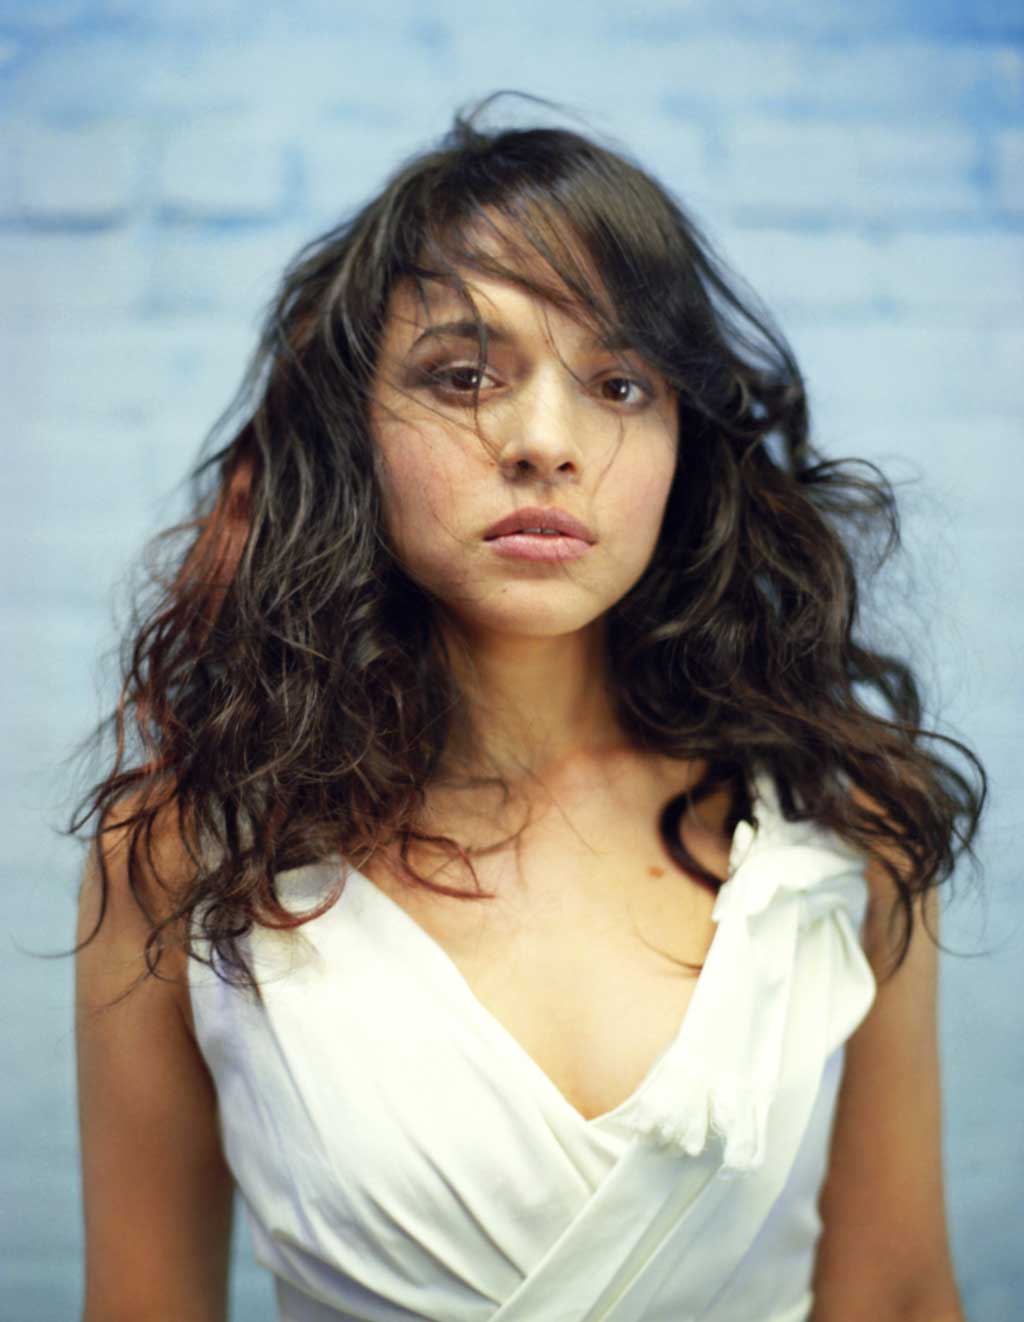 To The Norah Jones Wallpaper Just Right Click On Image